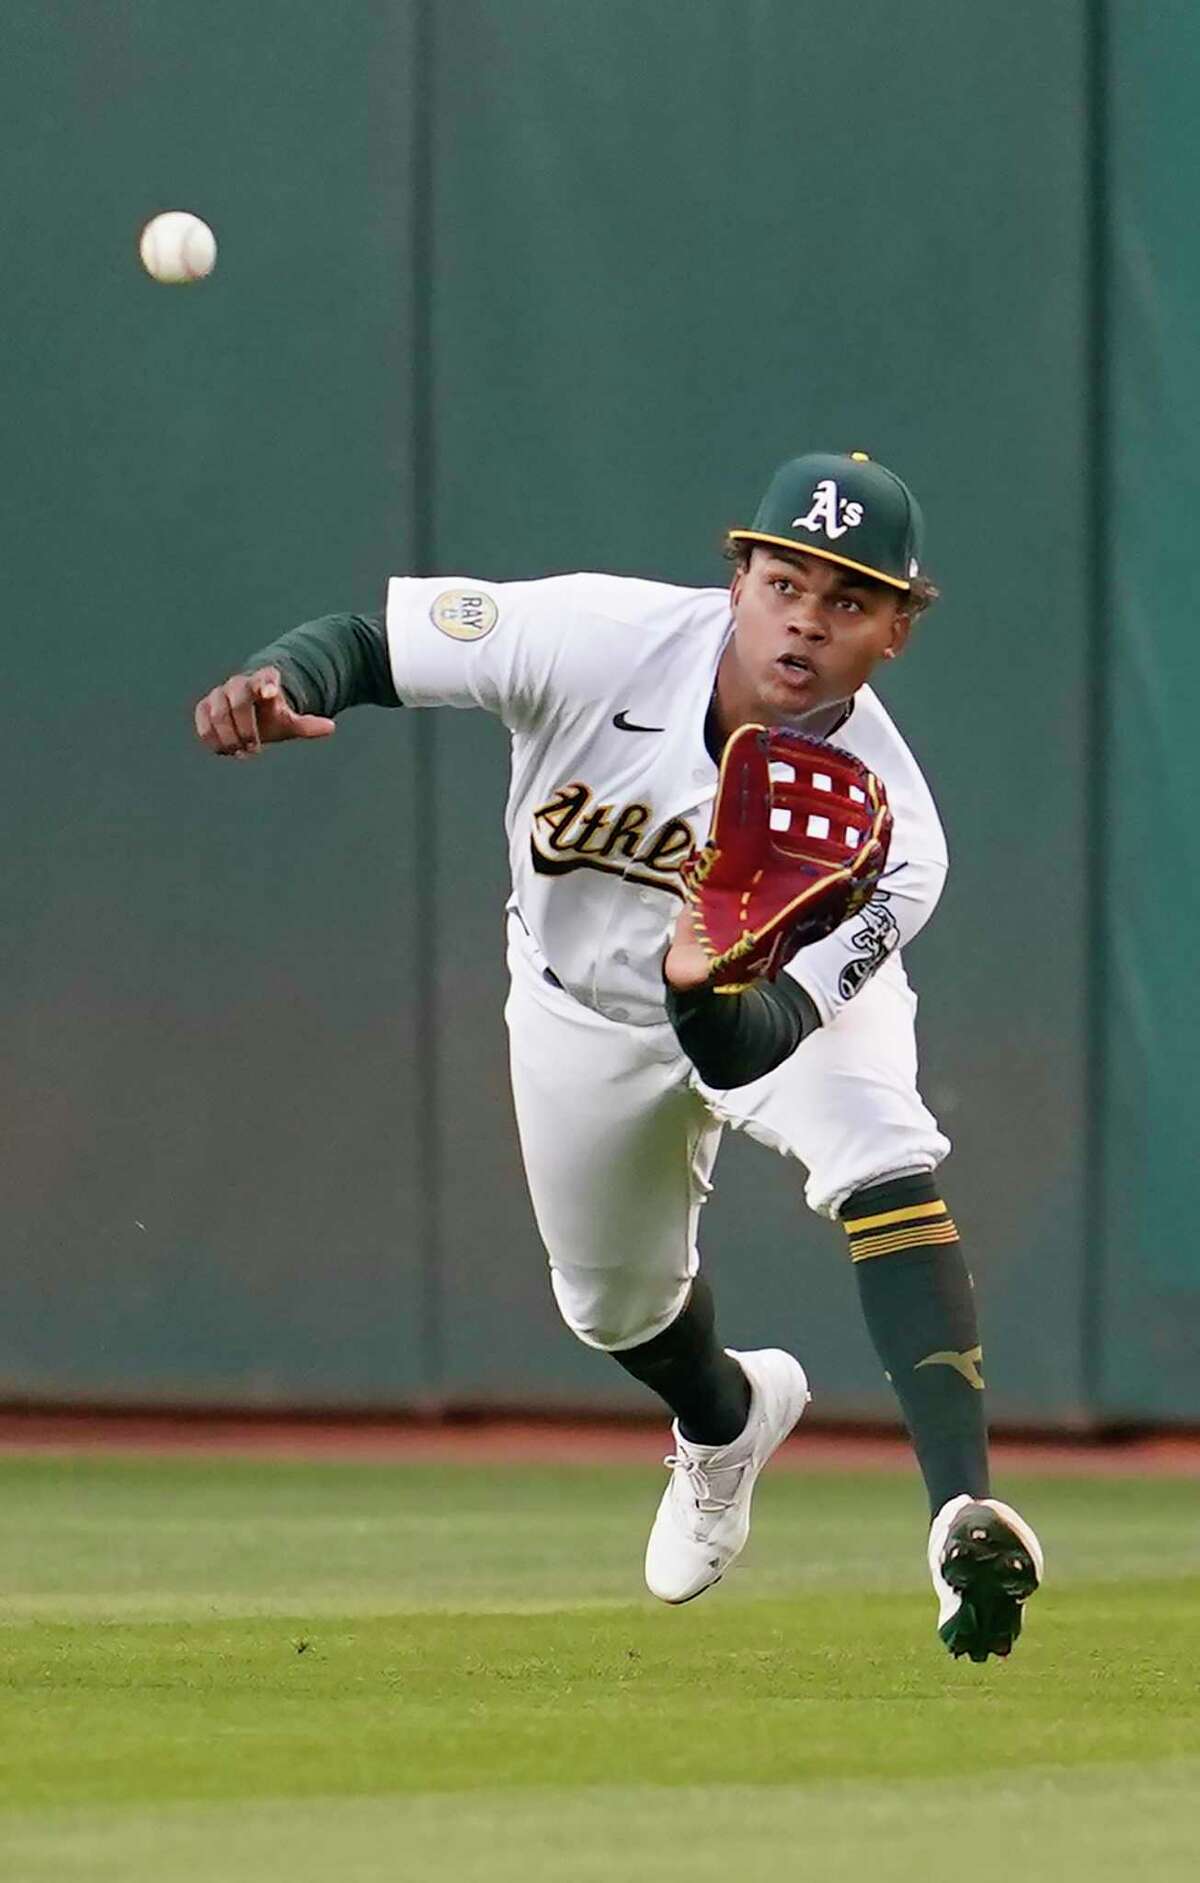 Oakland Athletics center fielder Cristian Pache catches an RBI-sacrifice fly hit by Texas Rangers' Marcus Semien during the second inning of a baseball game in Oakland, Calif., Friday, April 22, 2022. (AP Photo/Jeff Chiu)